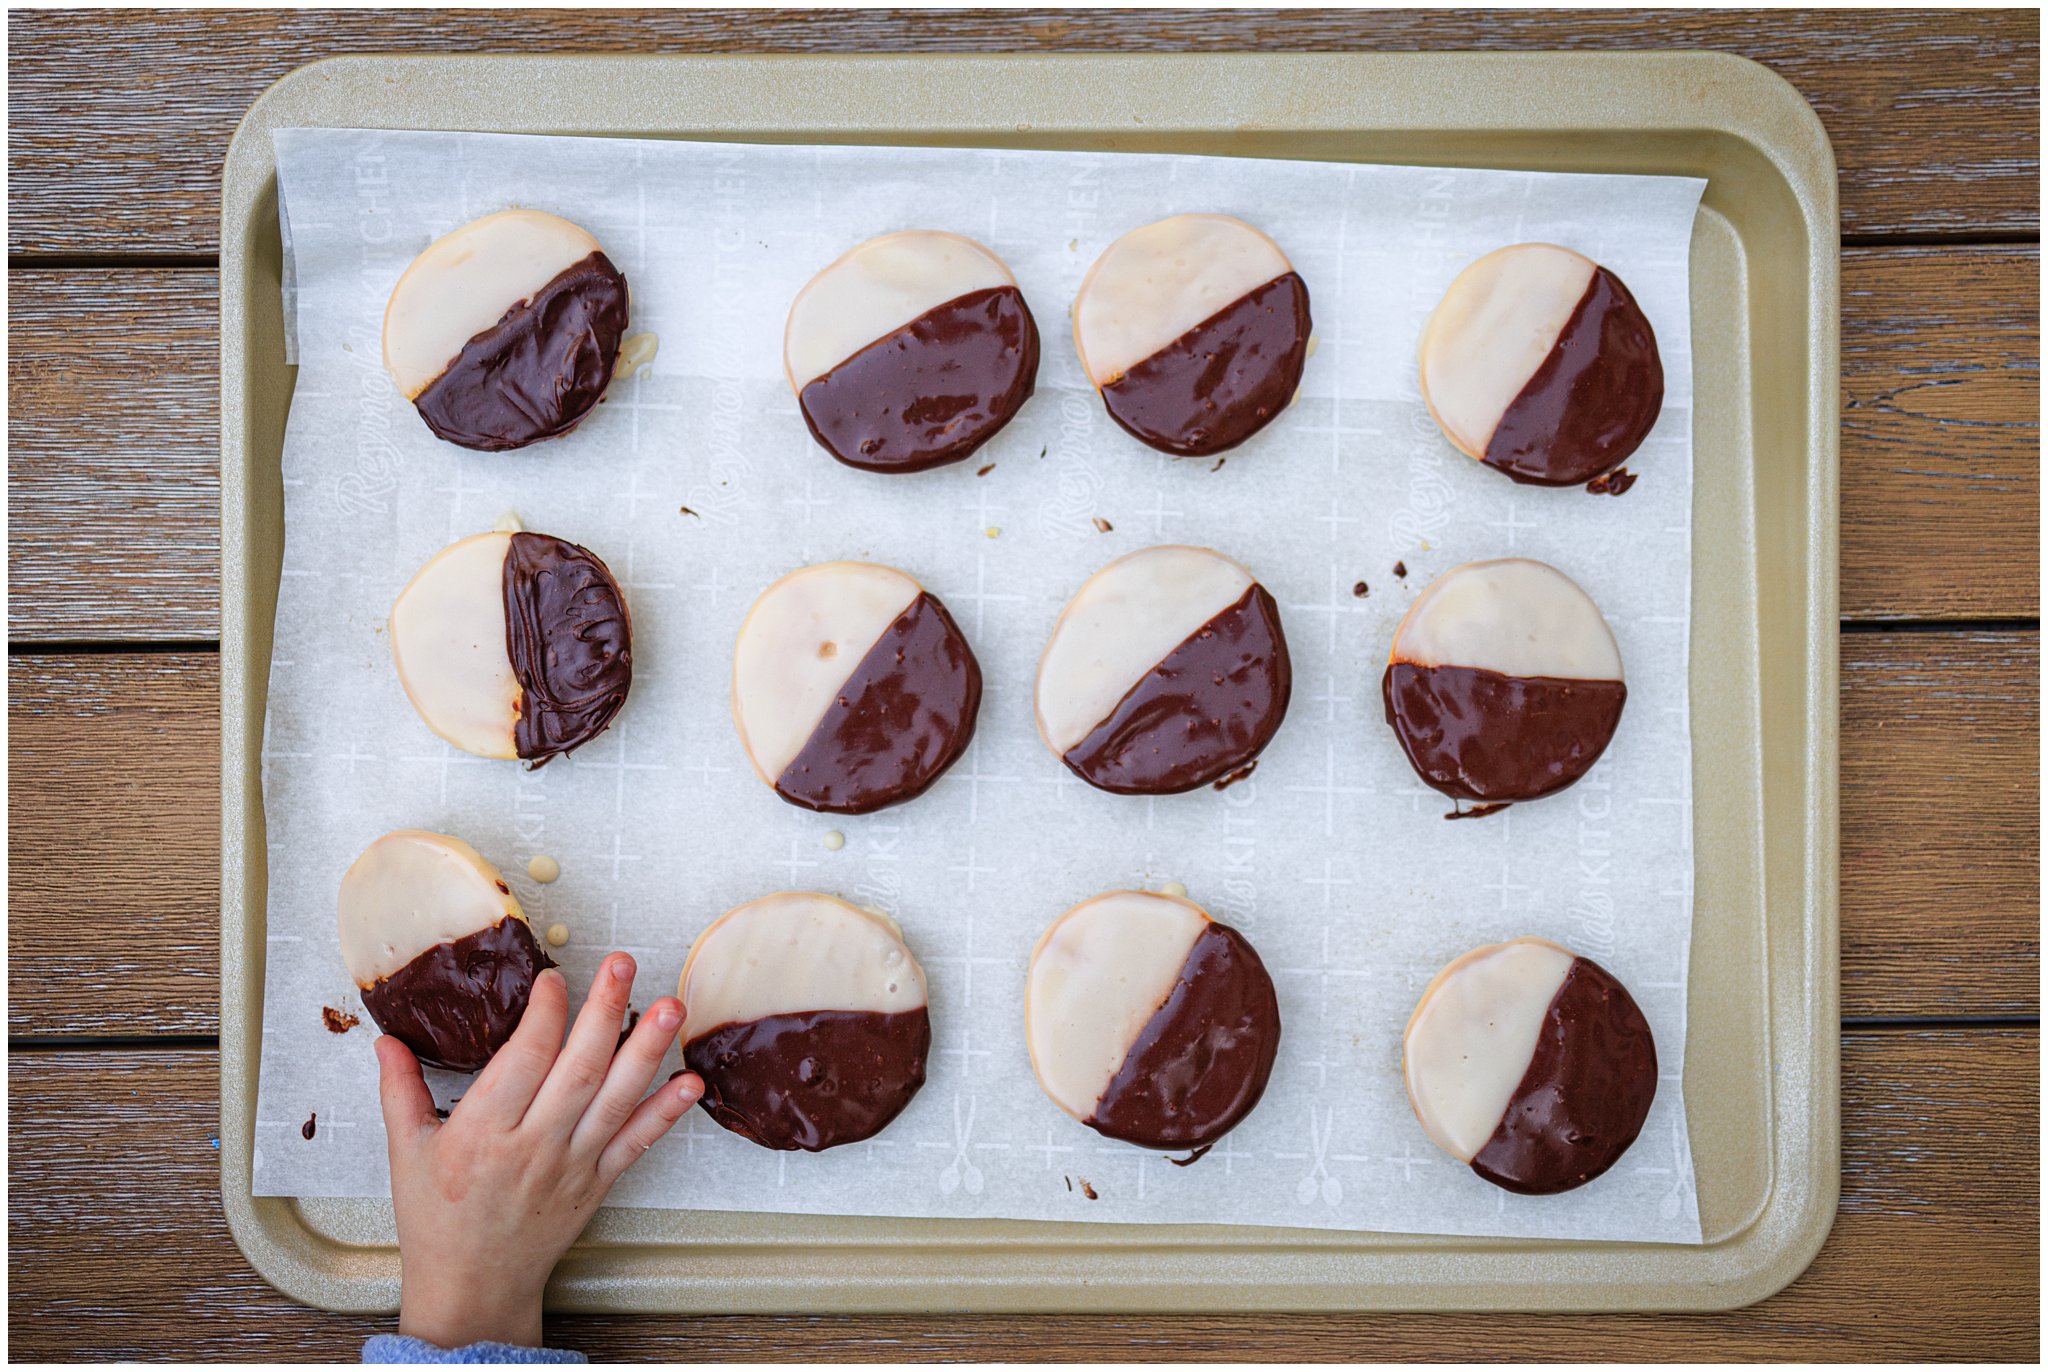 A tray of black & white cookies with a child's hand picking up one of the cookies.